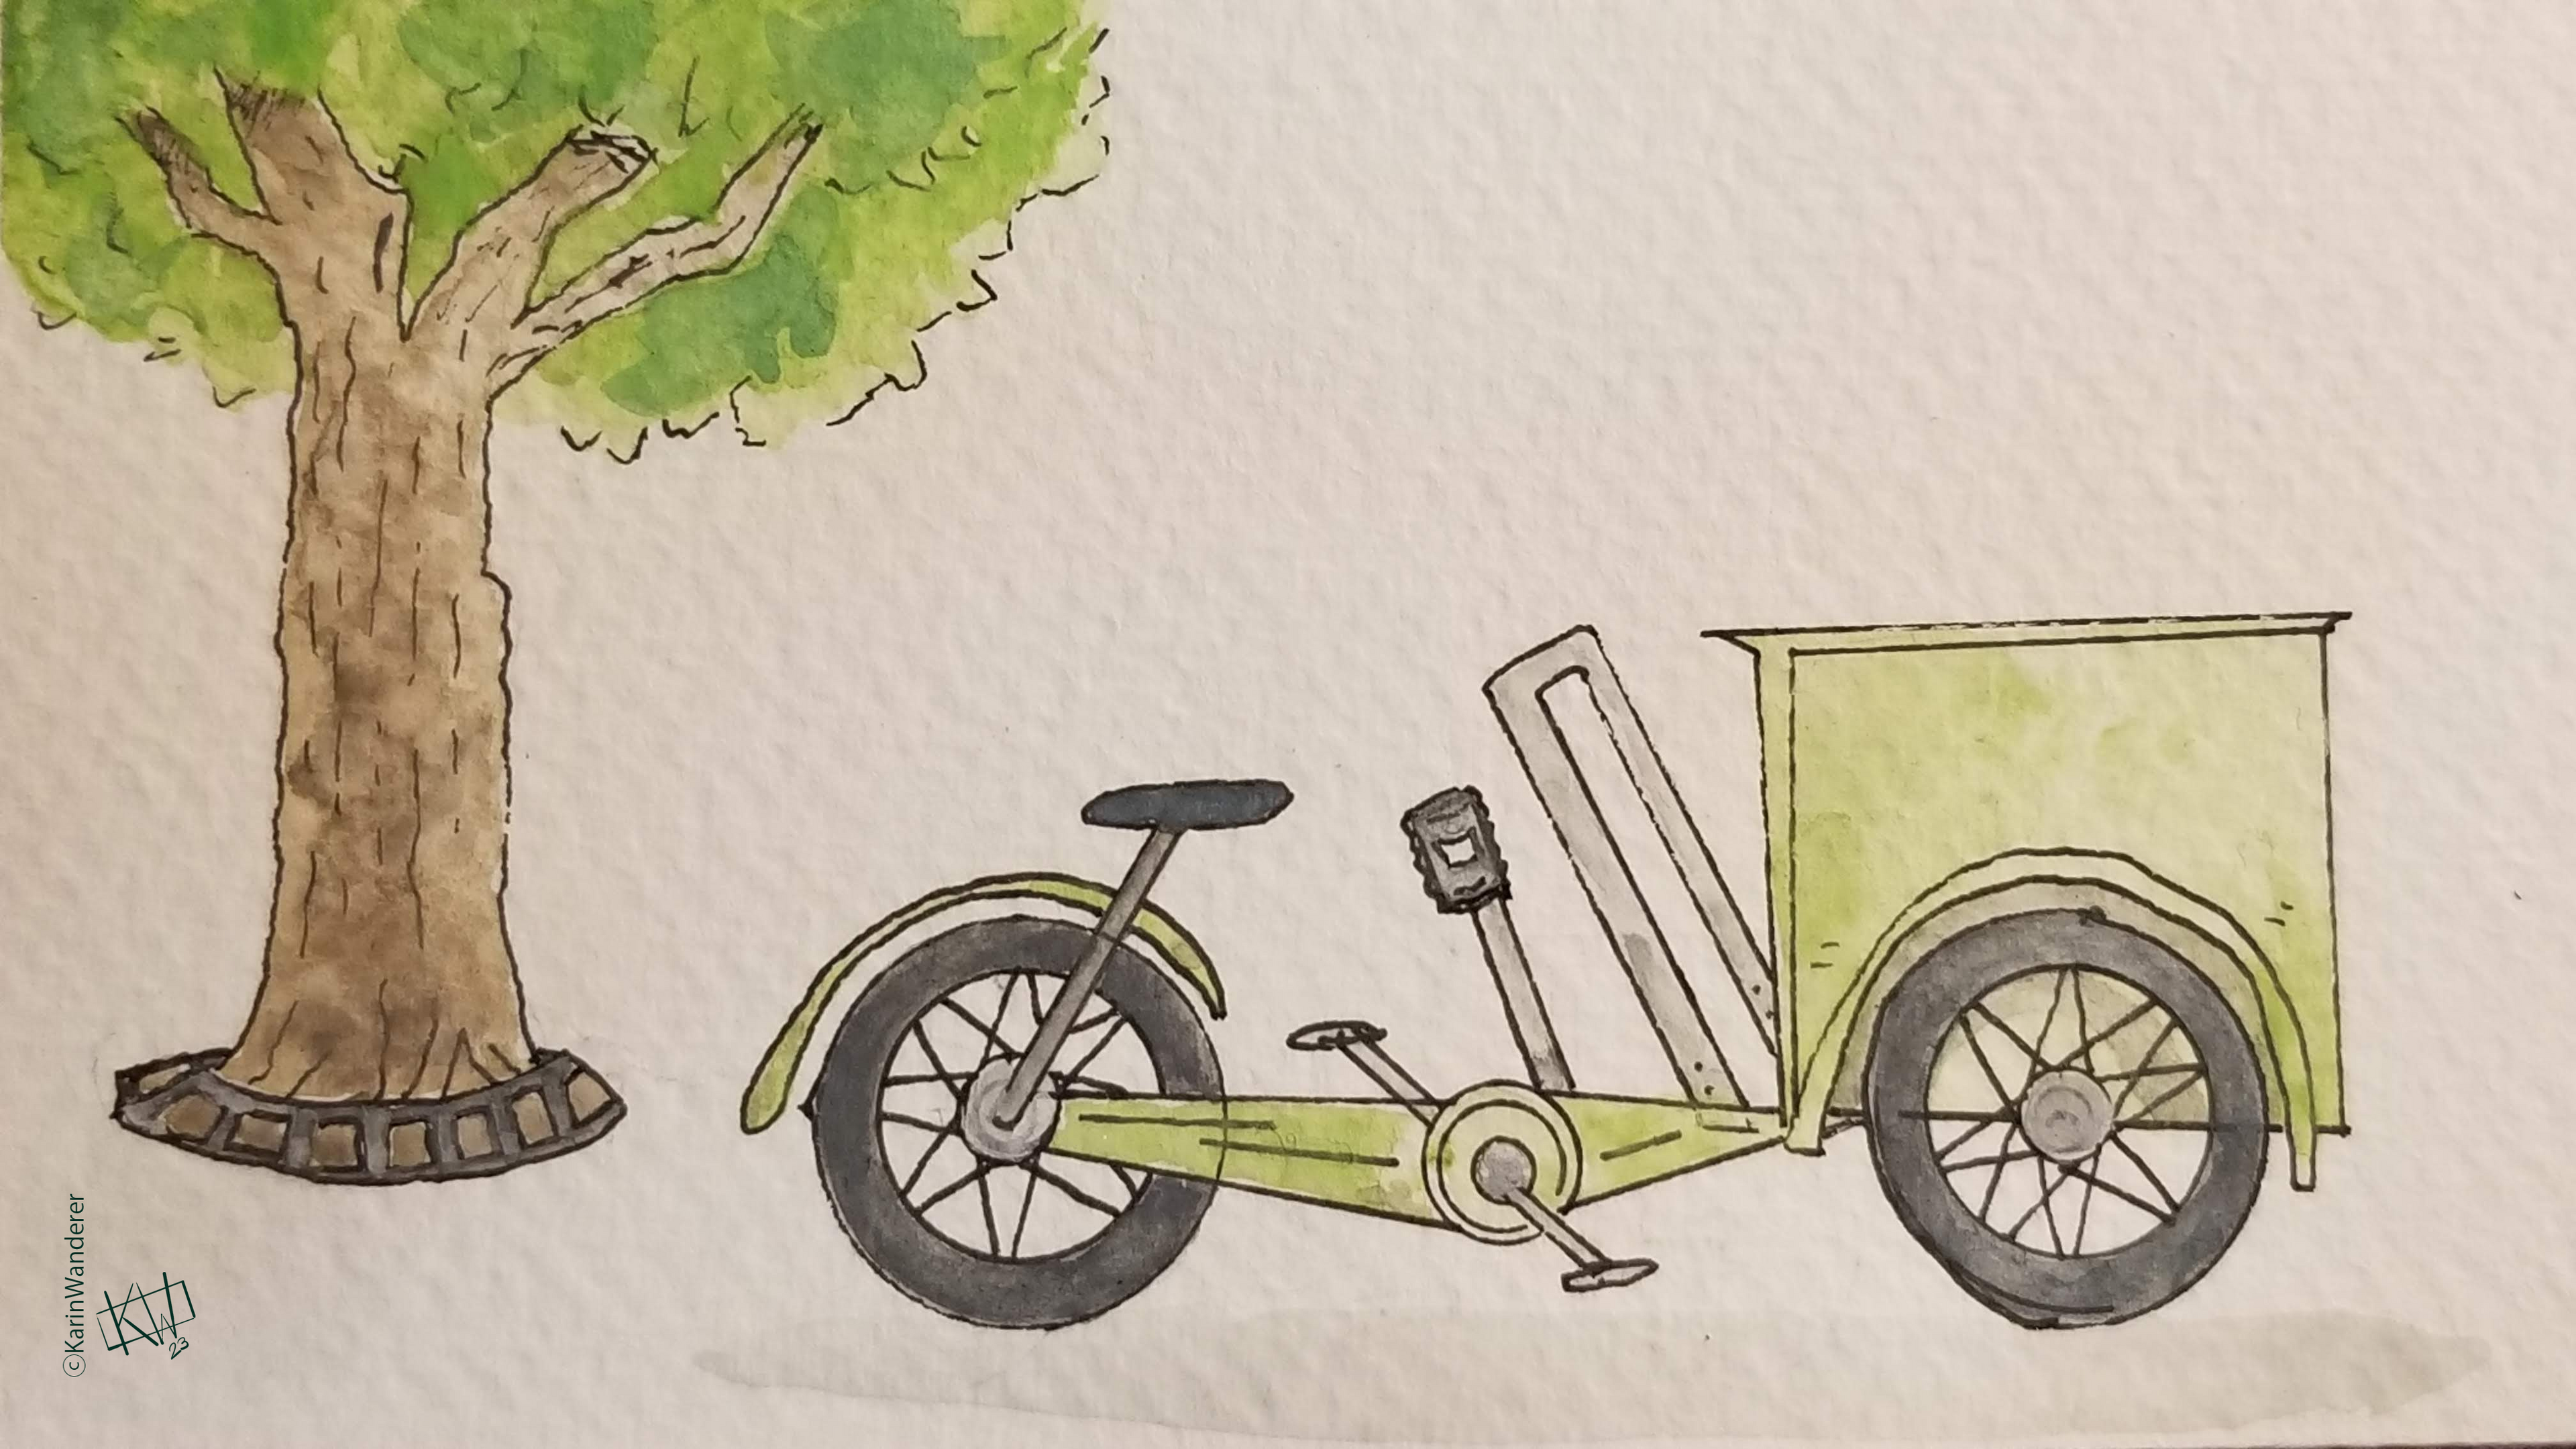 Watercolor & ink of a tree surrounded by a grate. Next to it is a green motorized tricycle with a compartment on the front for a child to ride in.